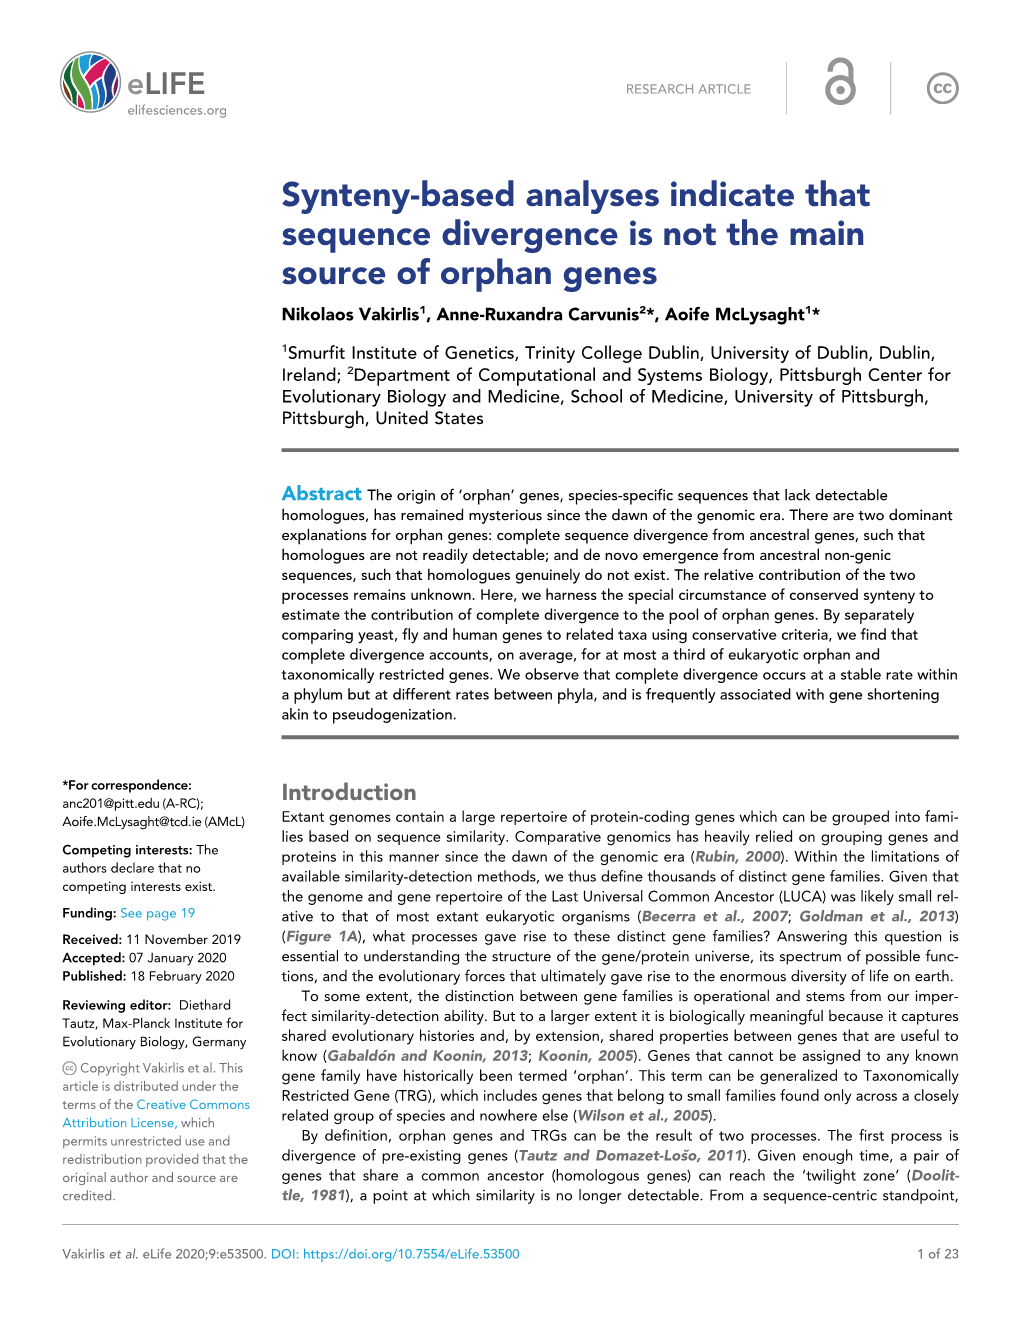 Synteny-Based Analyses Indicate That Sequence Divergence Is Not the Main Source of Orphan Genes Nikolaos Vakirlis1, Anne-Ruxandra Carvunis2*, Aoife Mclysaght1*